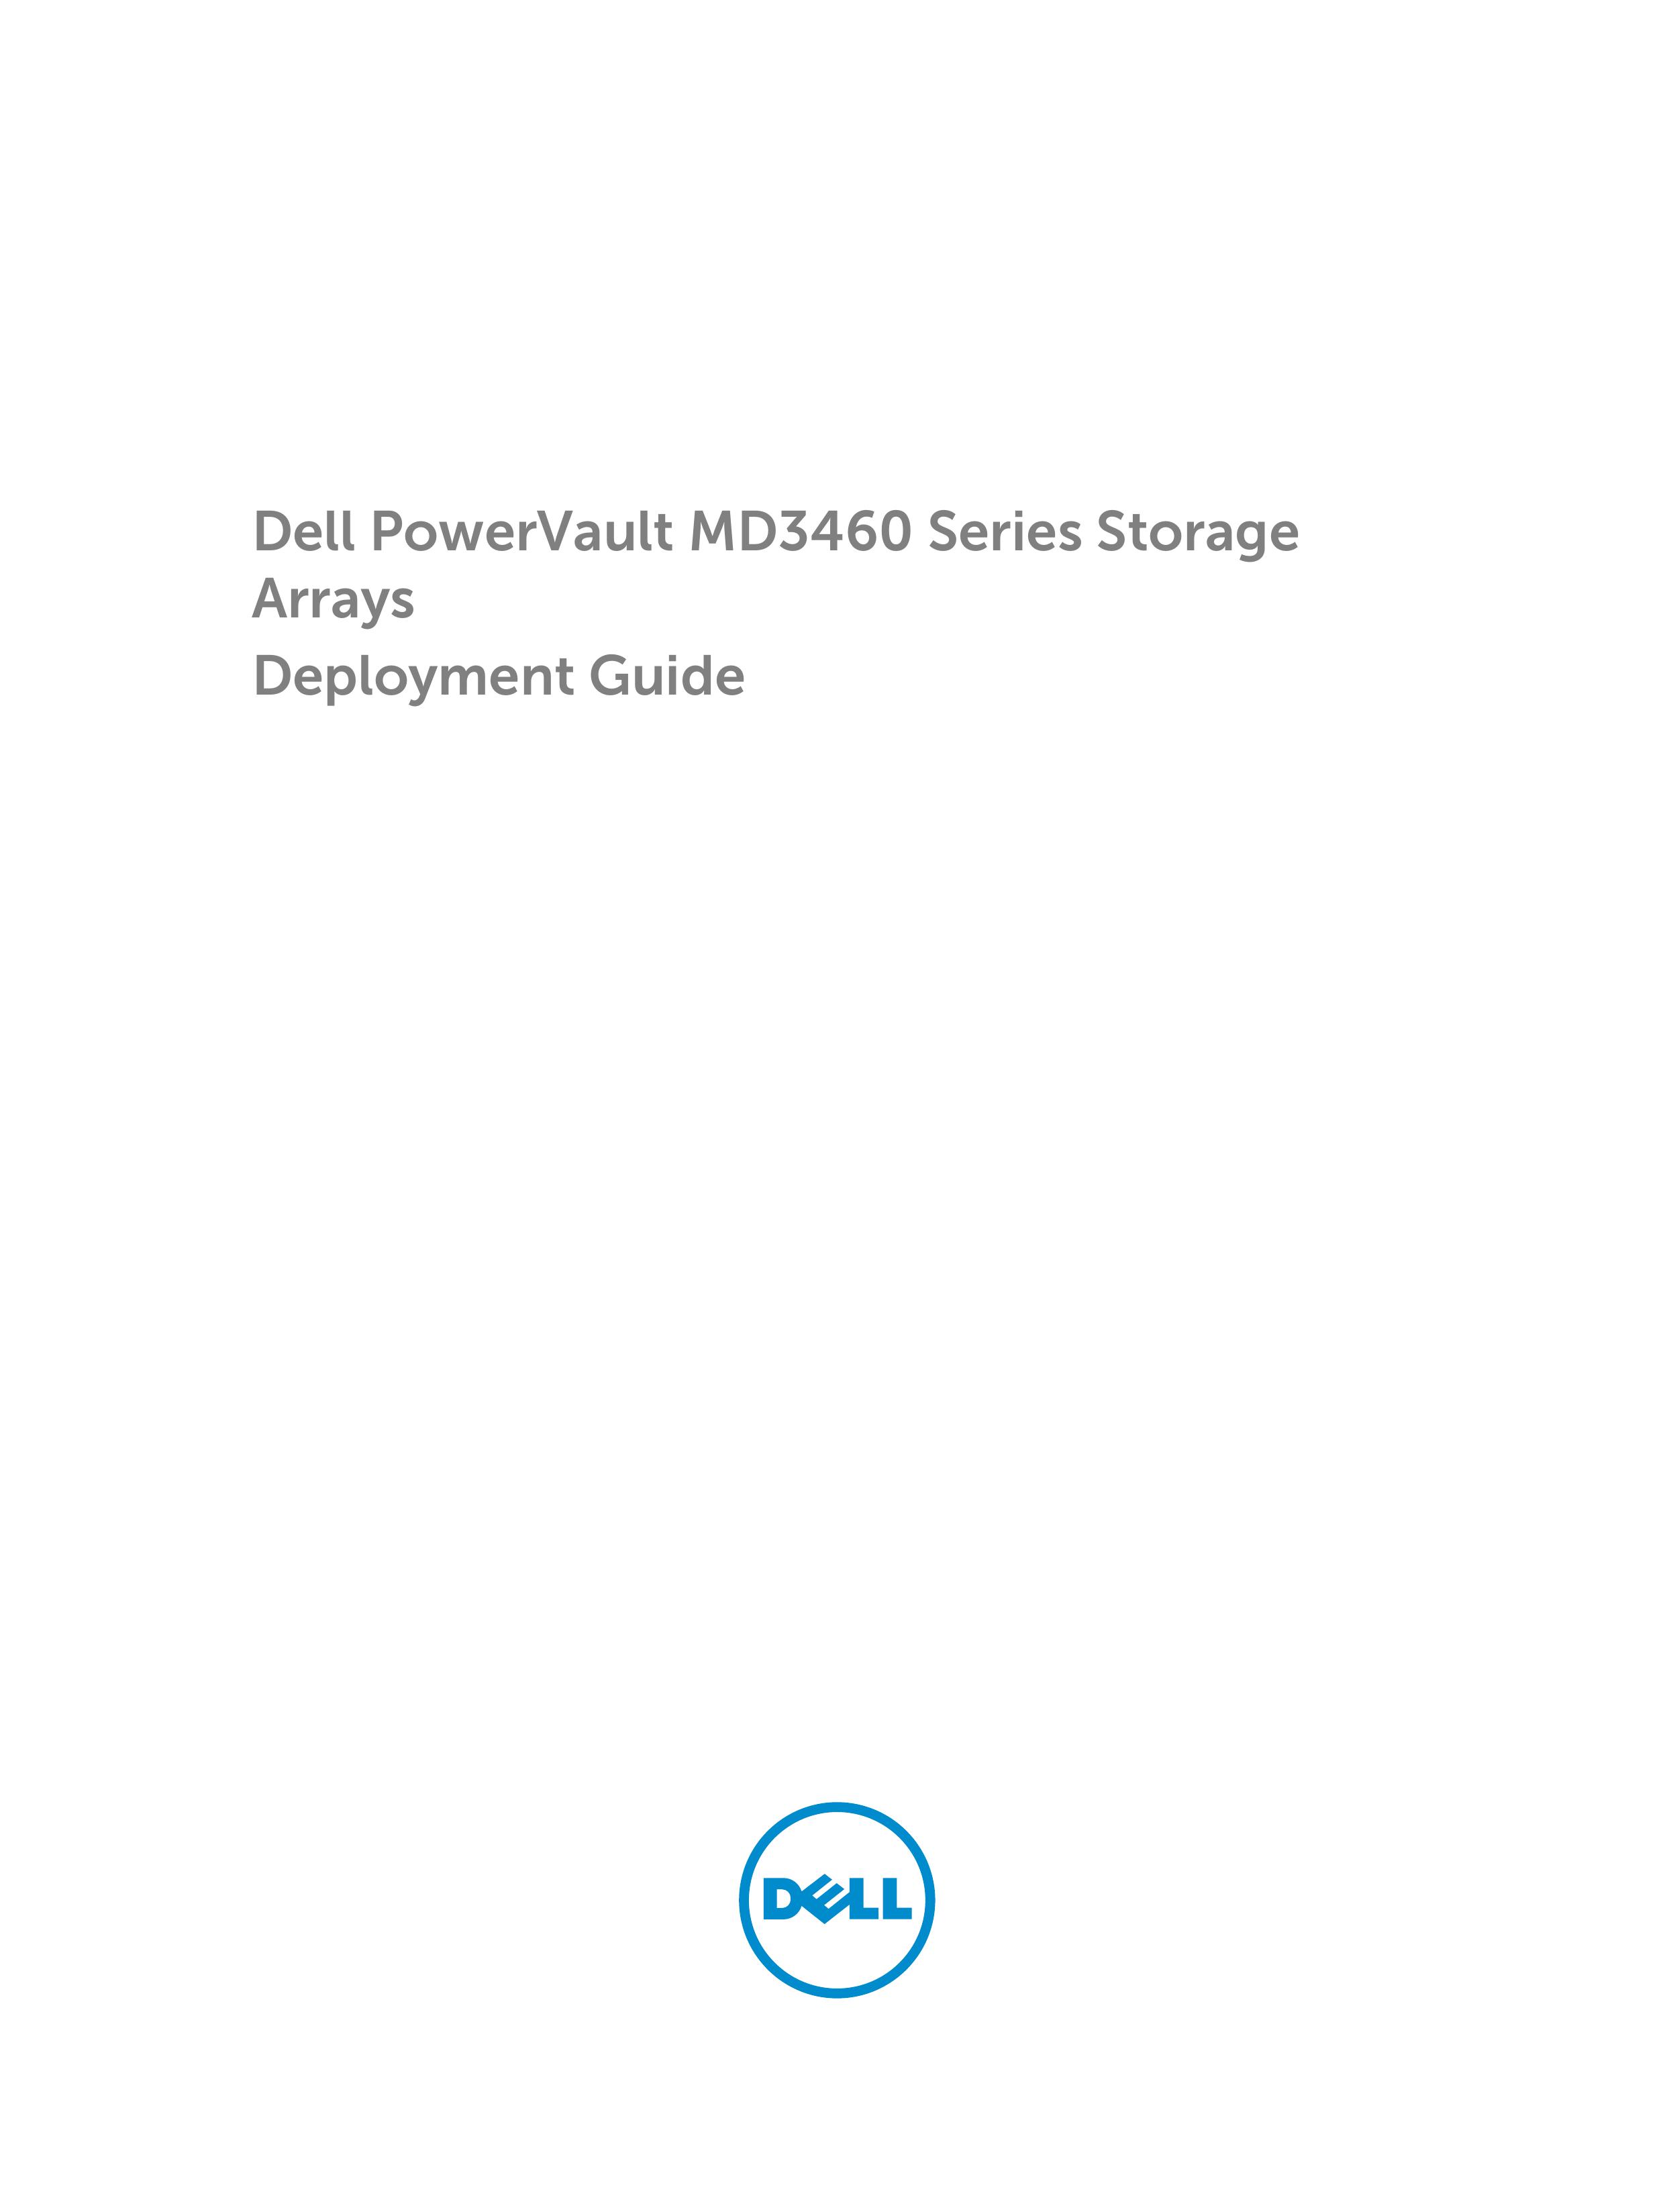 Dell MD3460 Outdoor Storage User Manual